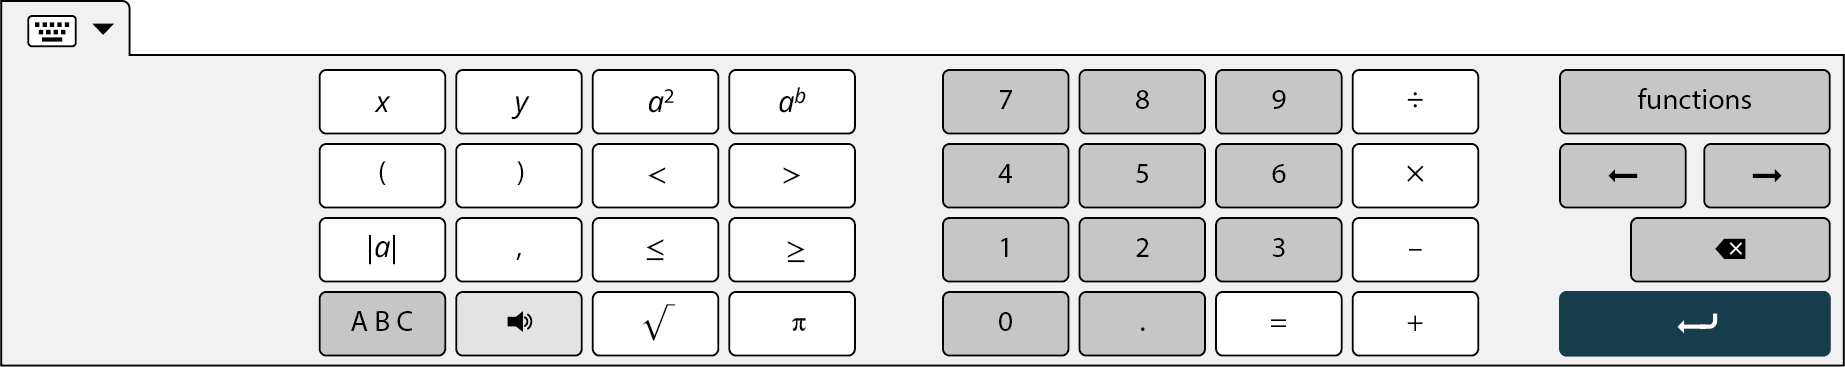 Desmos keyboard is displayed. Three sets of keys are displayed. The first set has 4 rows of 4 keys, each. Row 1: x, y, a squared, and a to the power b. Row 2: open parenthesis, close parenthesis, lesser than, and greater than. Row 3: modulus of a, comma, lesser than or equal to, and greater than or equal to. Row 4: A B C, sound, square root, and pi. The second set has 4 rows of 4 keys, each. Row 1: 7, 8, 9, and division symbol. Row 2: 4, 5, 6, and multiplication symbol. Row 3: 1, 2, 3, and minus symbol. Row 4: 0, dot, equals sign, and plus sign. The third set has the following keys: functions, left arrow, right arrow, close, and back.